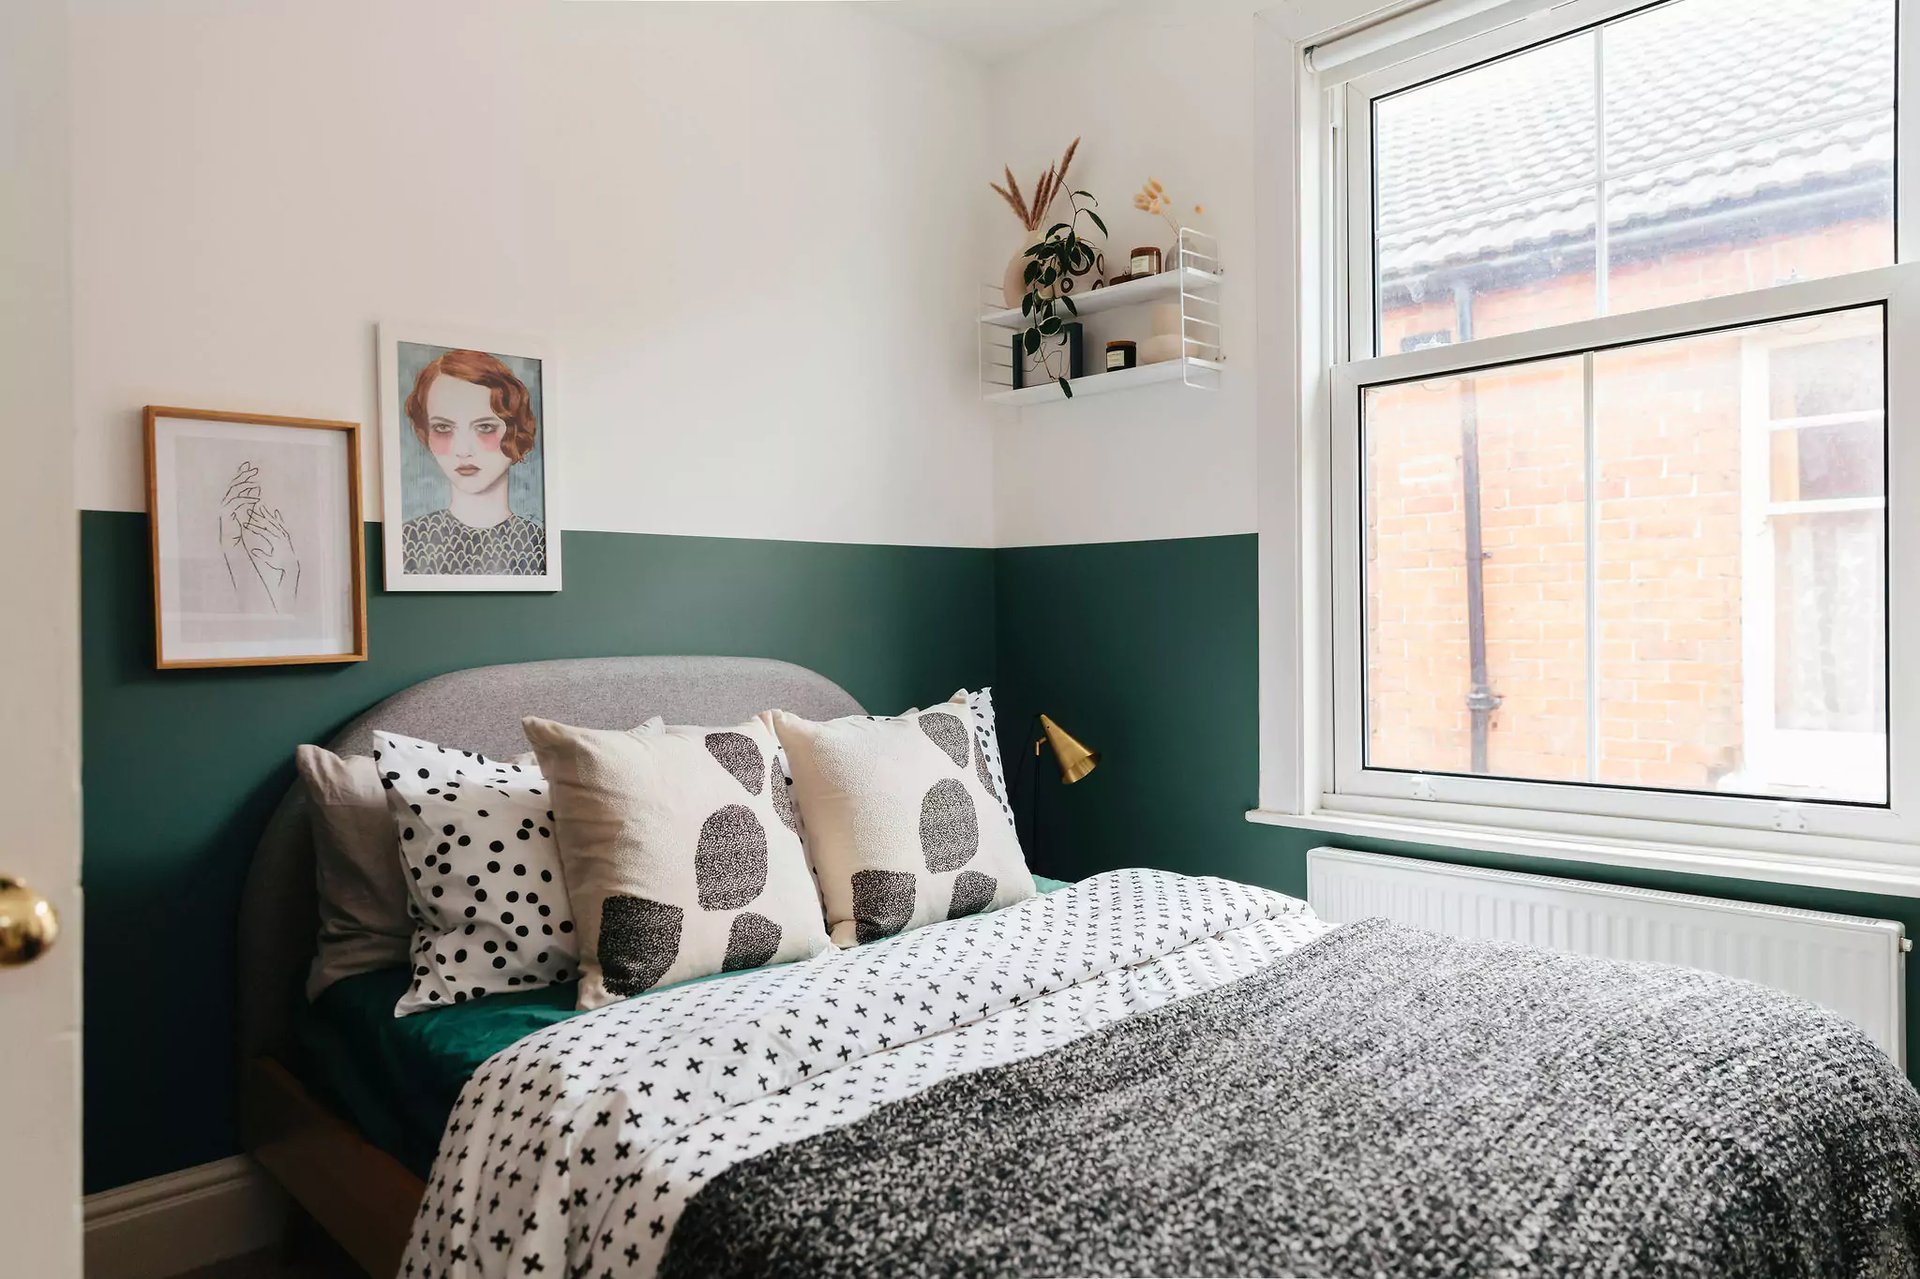 Bedroom with green half painted wall